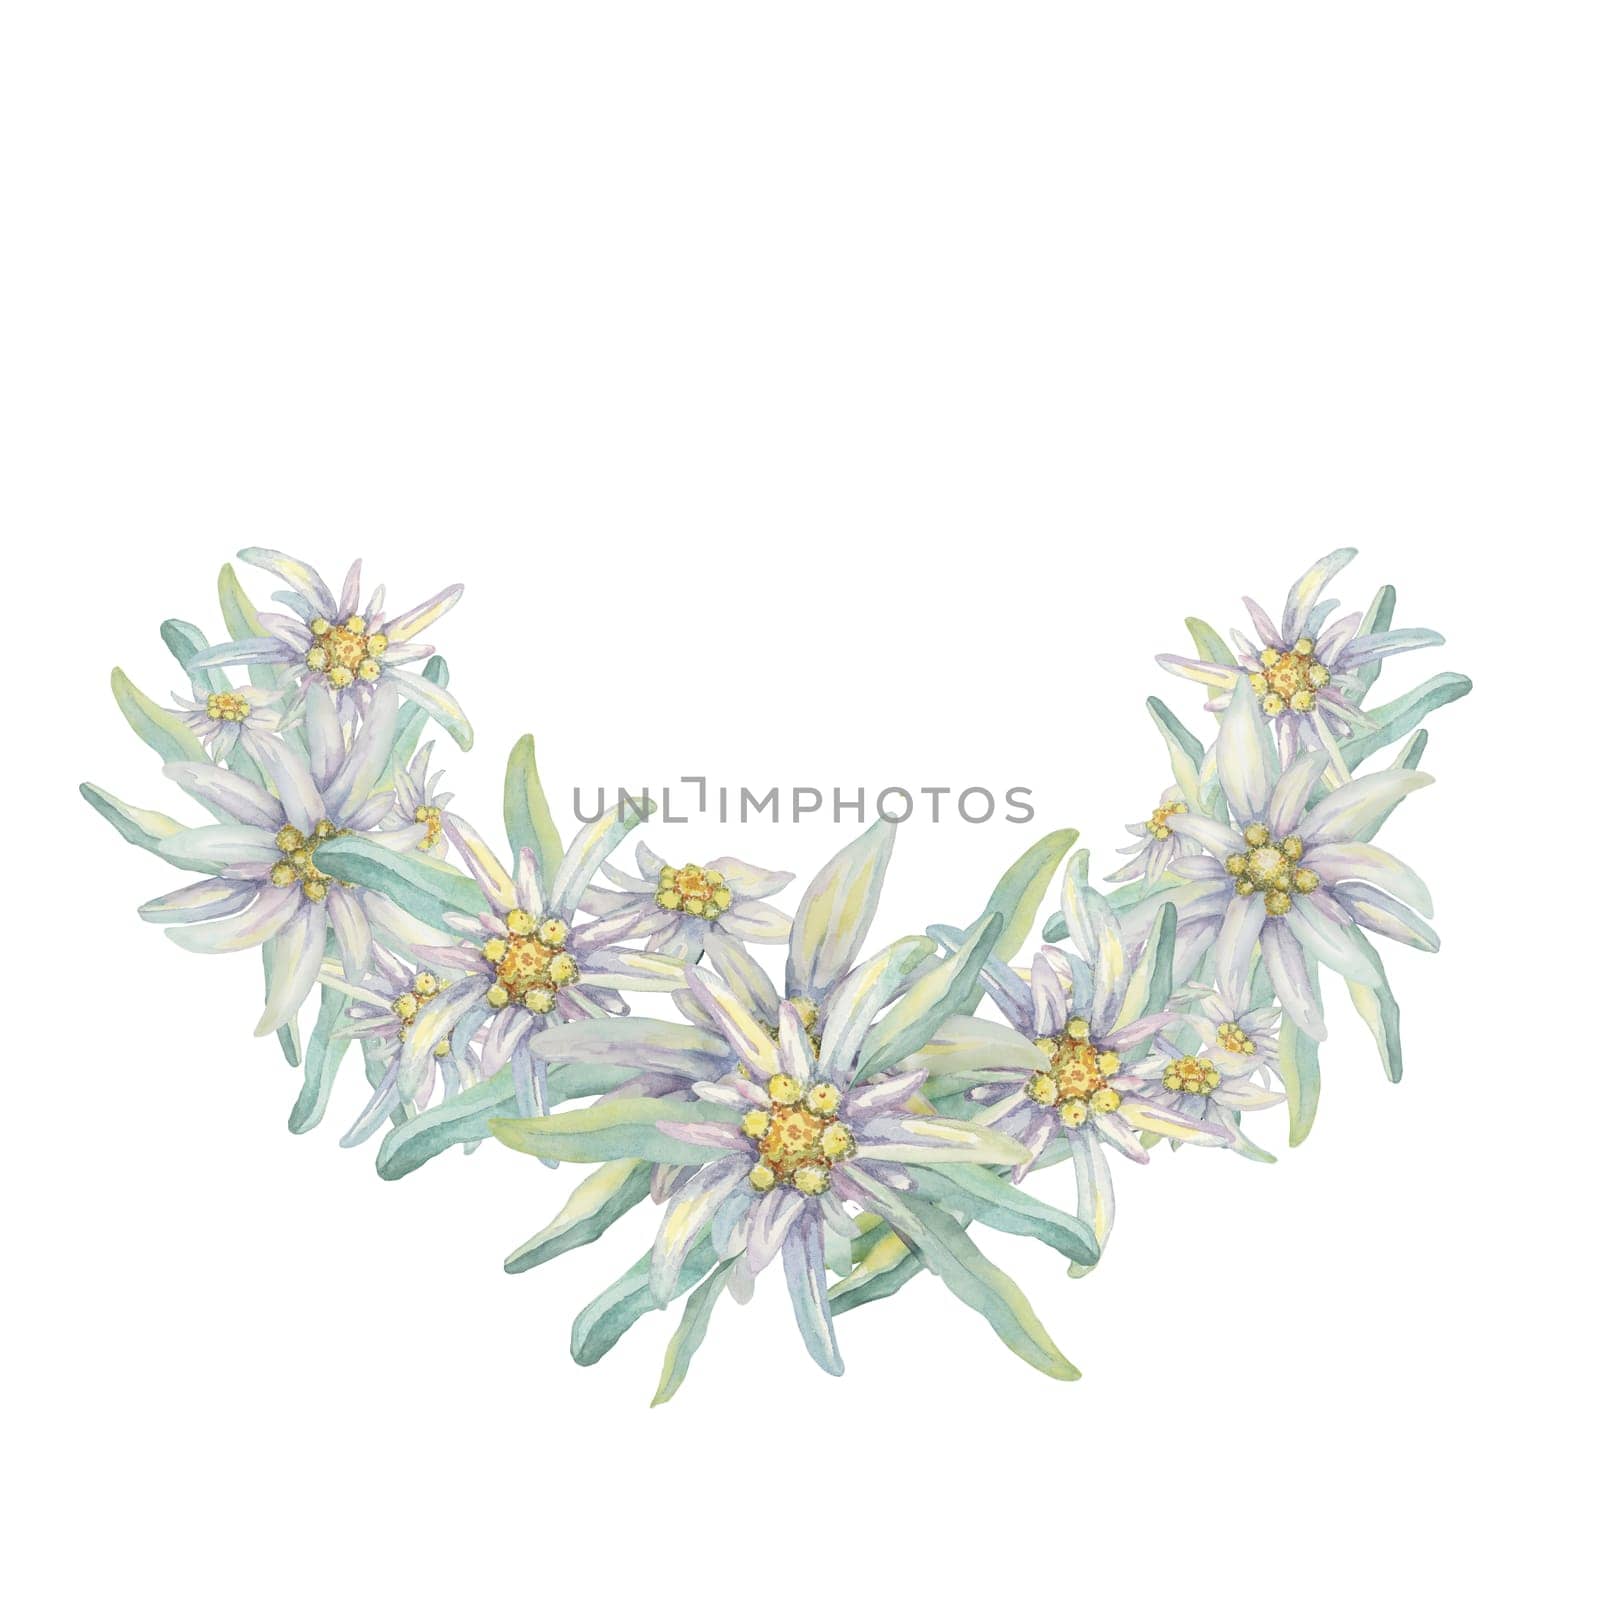 Partial arch wreath of edelweiss flowers by Fofito